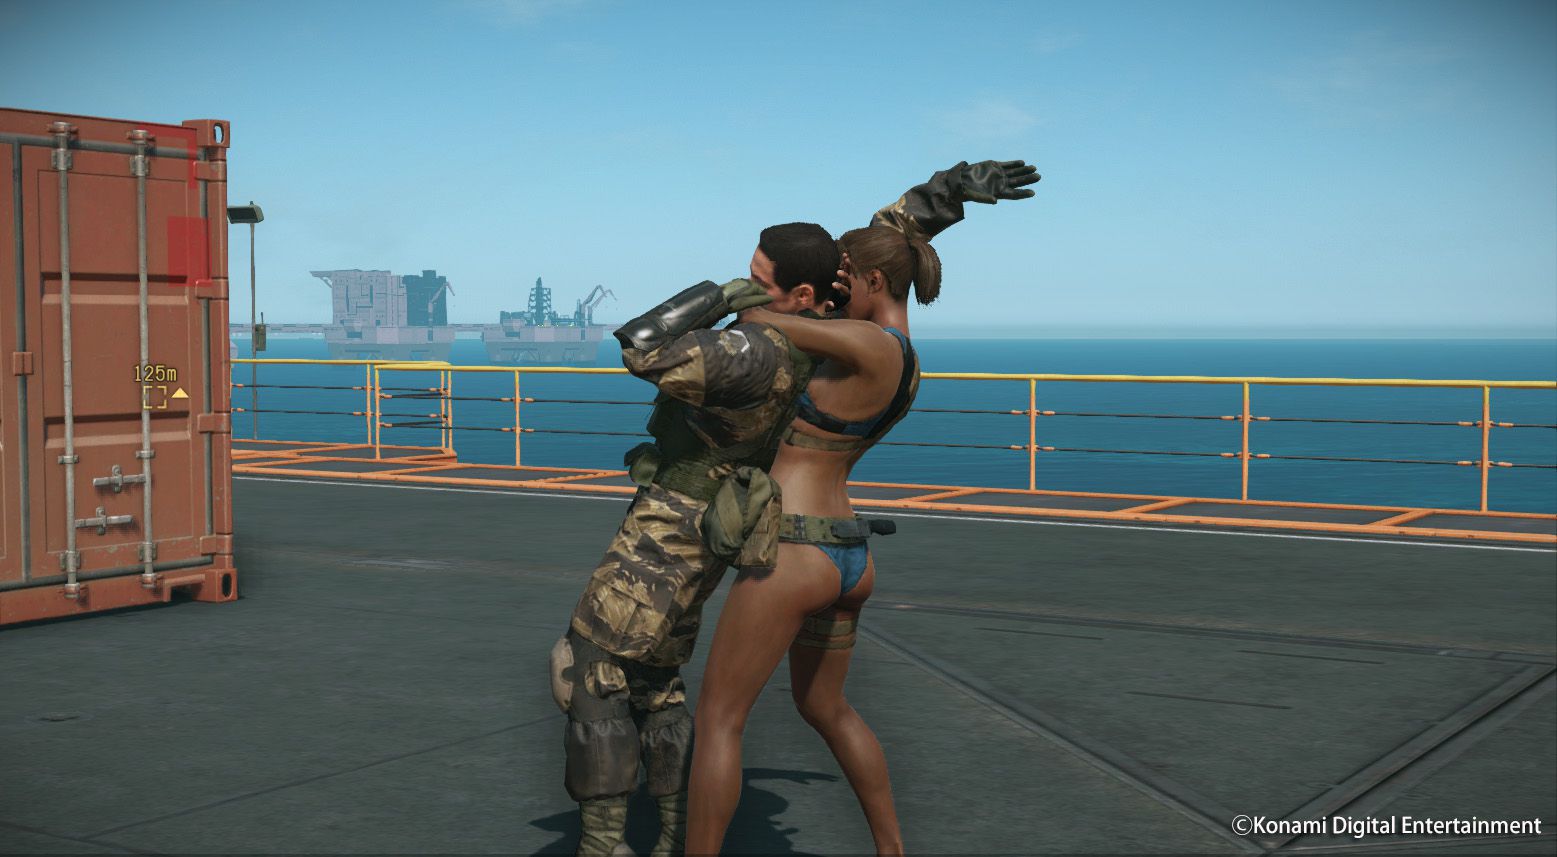 Elo, Metal Gear Solid V female characters be added bathing costumes! That dress guards too! 5